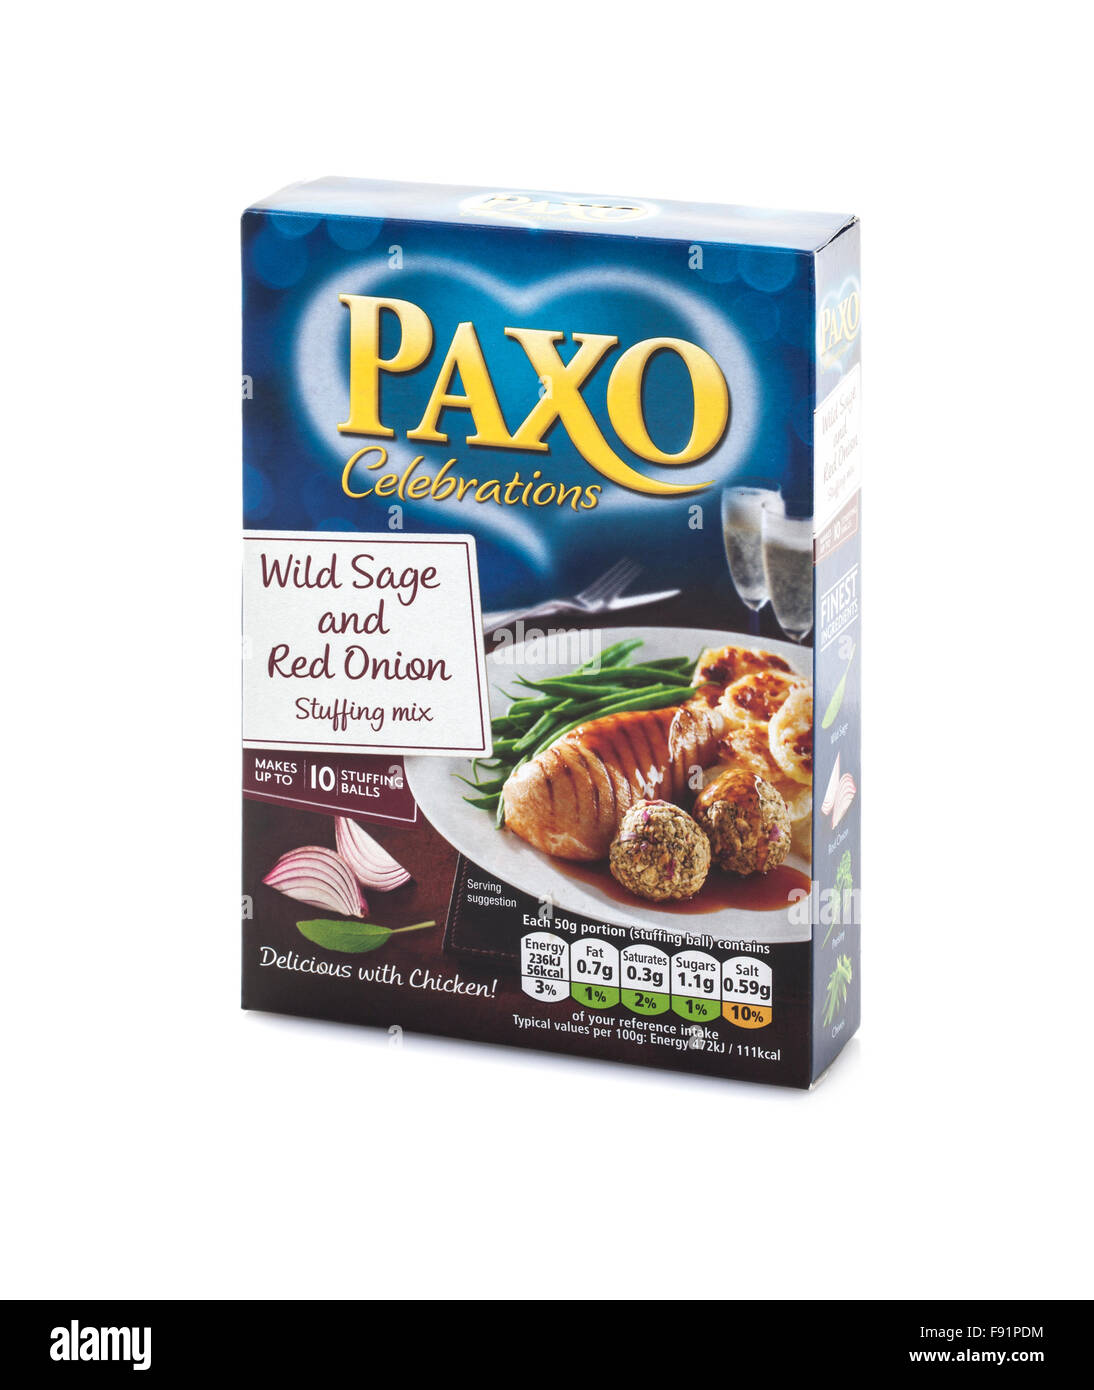 Paxo Celebrations Wild Sage and Red Onion Stuffing on a White Background Stock Photo